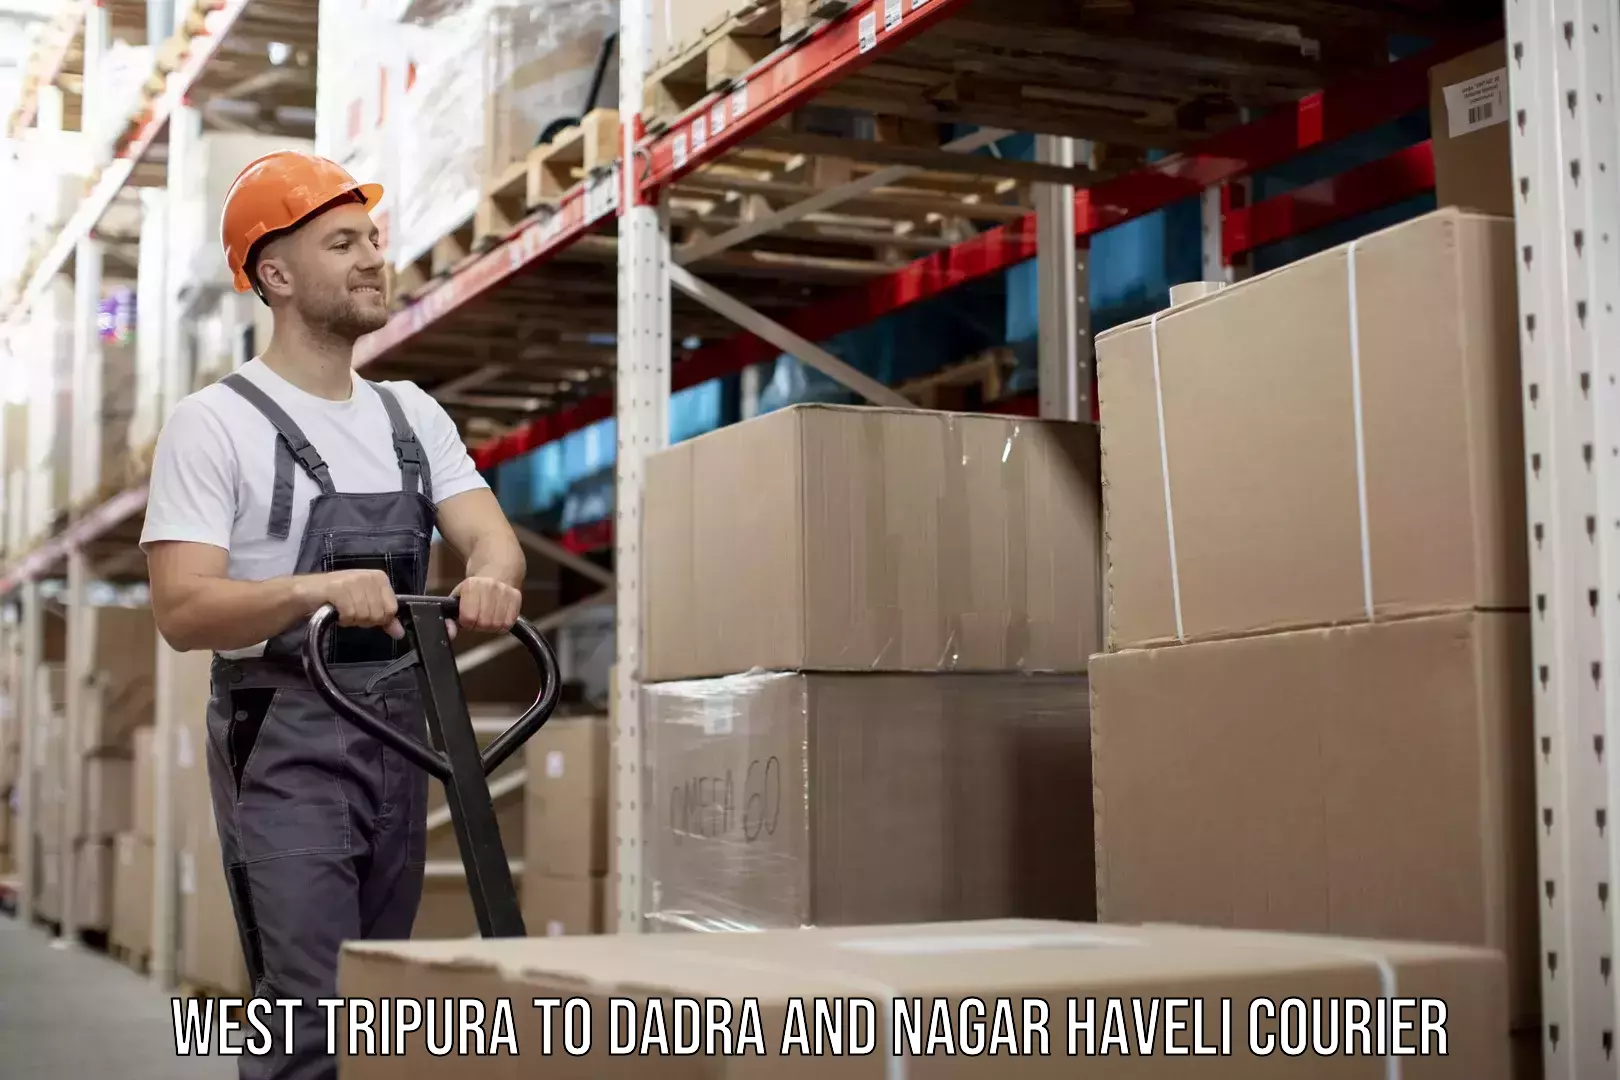 Large package courier in West Tripura to Dadra and Nagar Haveli